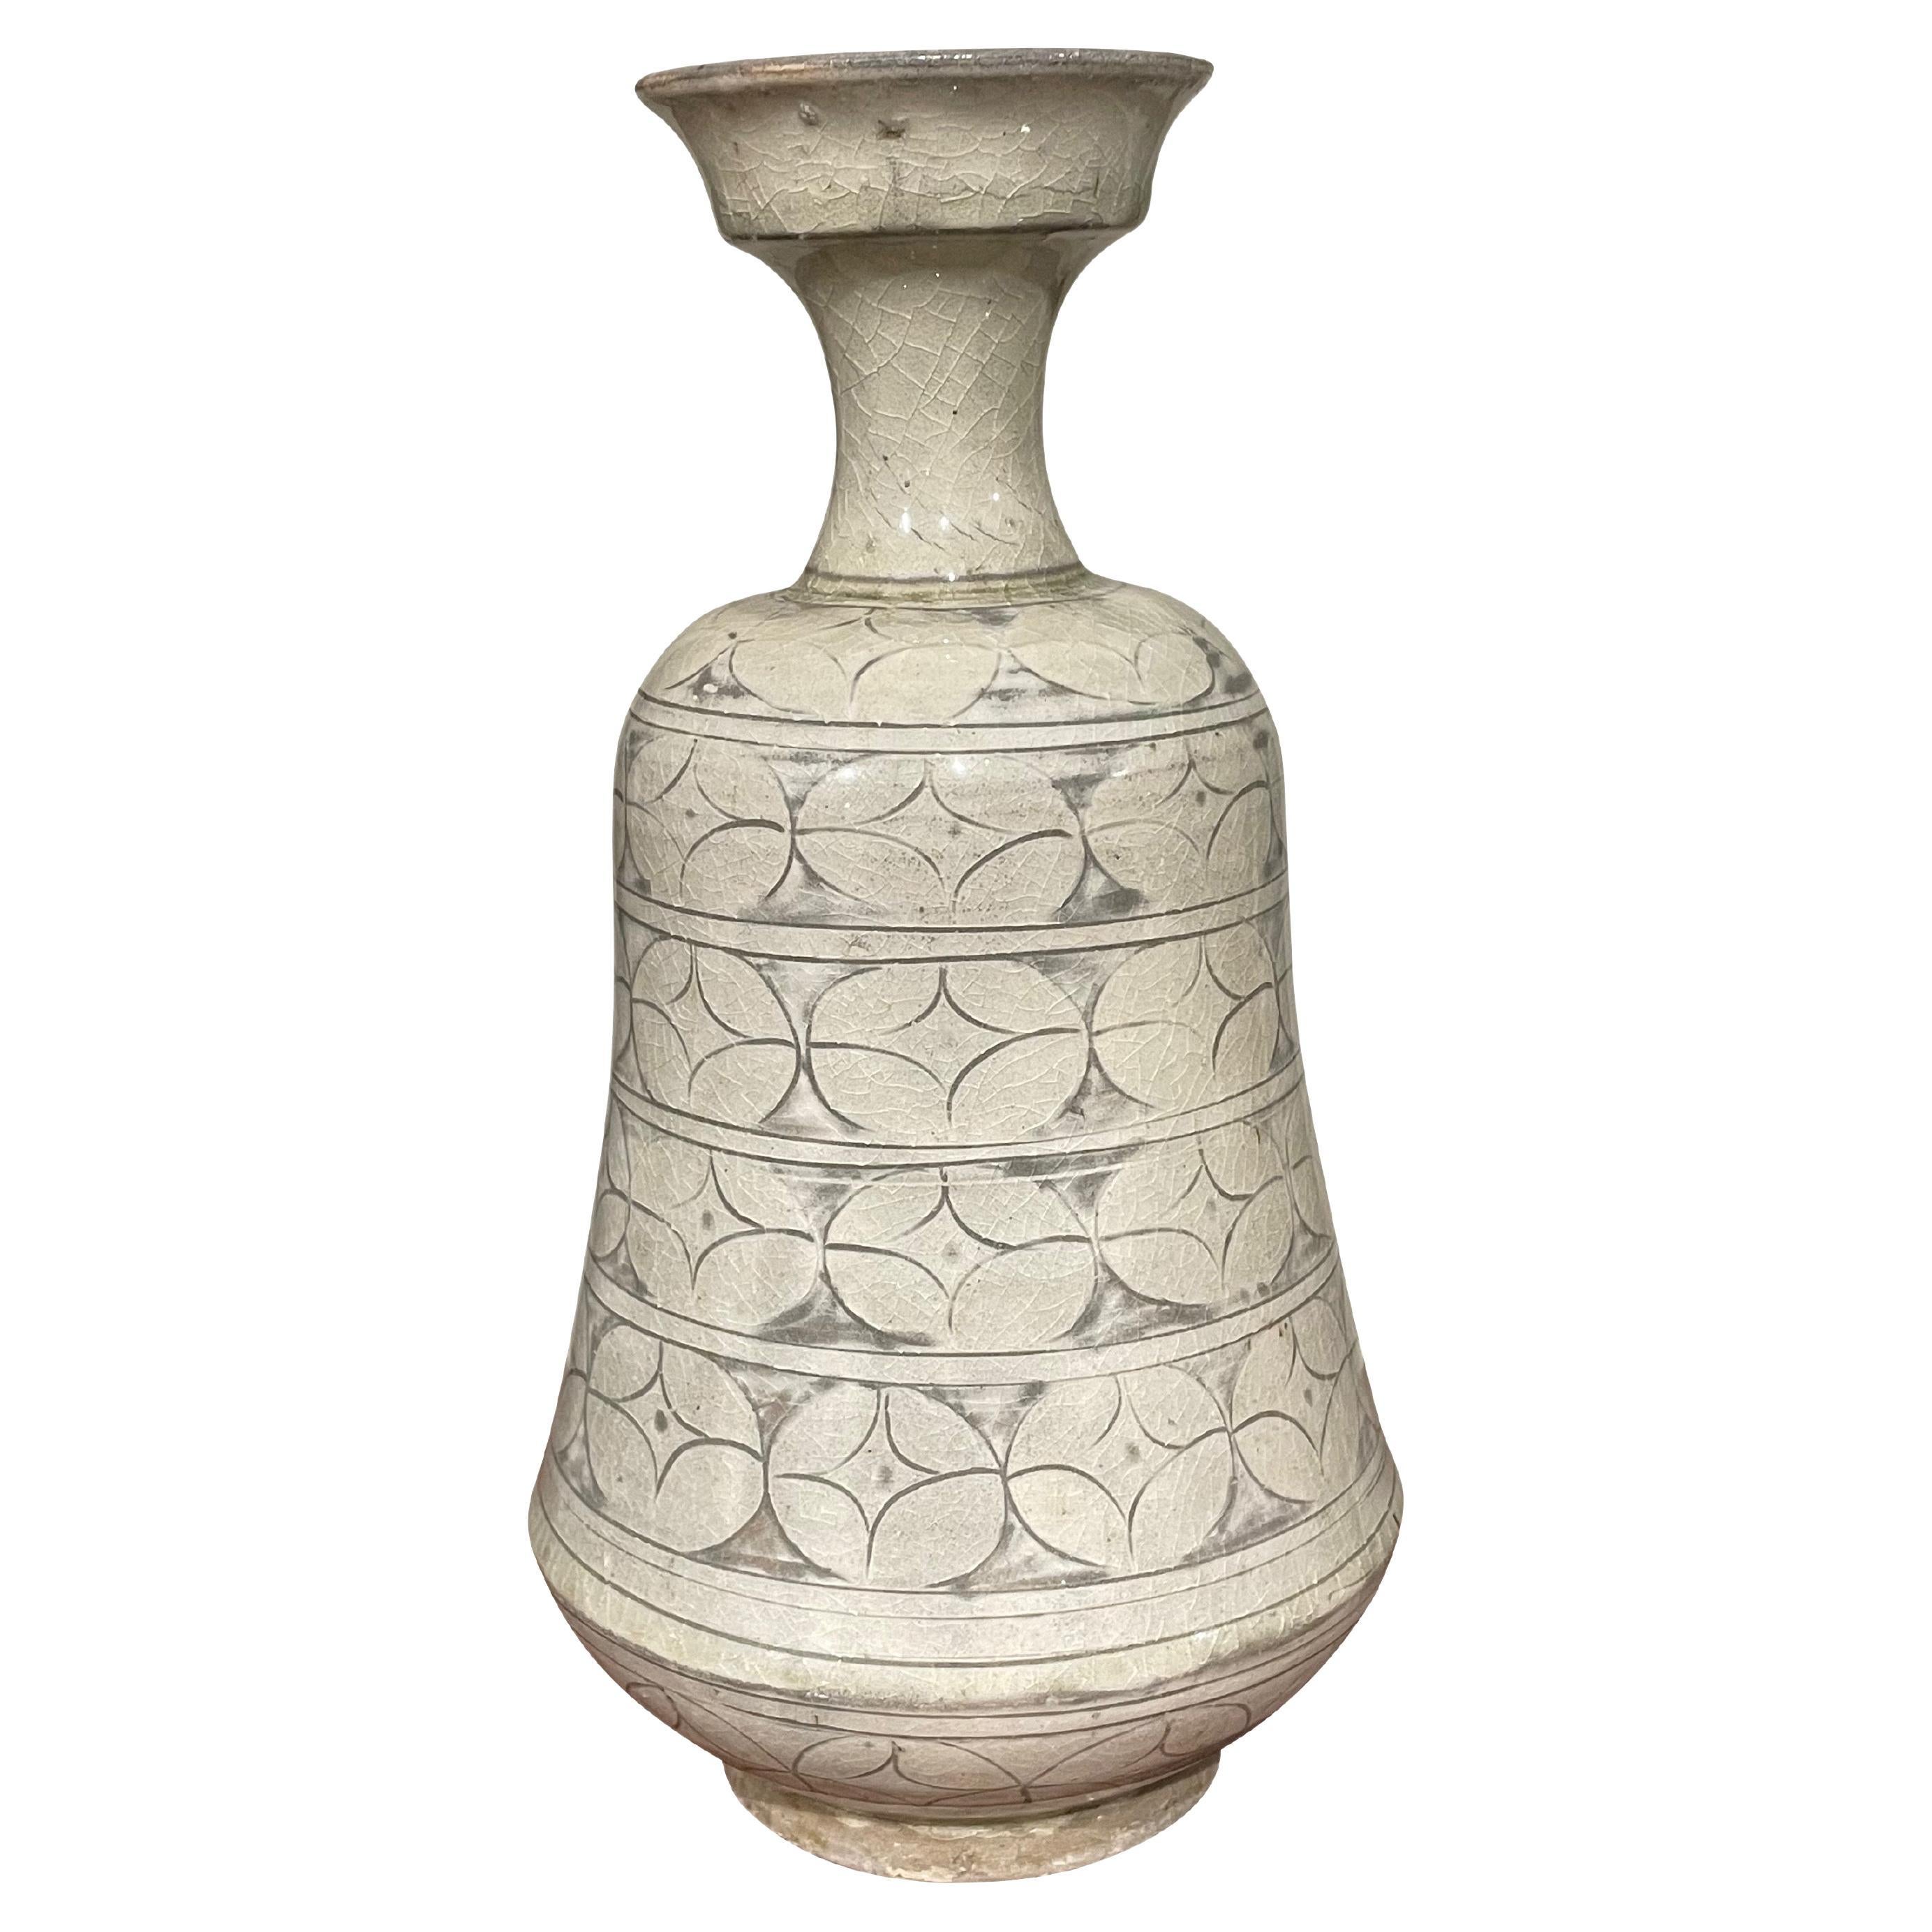 Cream Decorative Patterned Cup Shaped Top Vase, China, Contemporary 